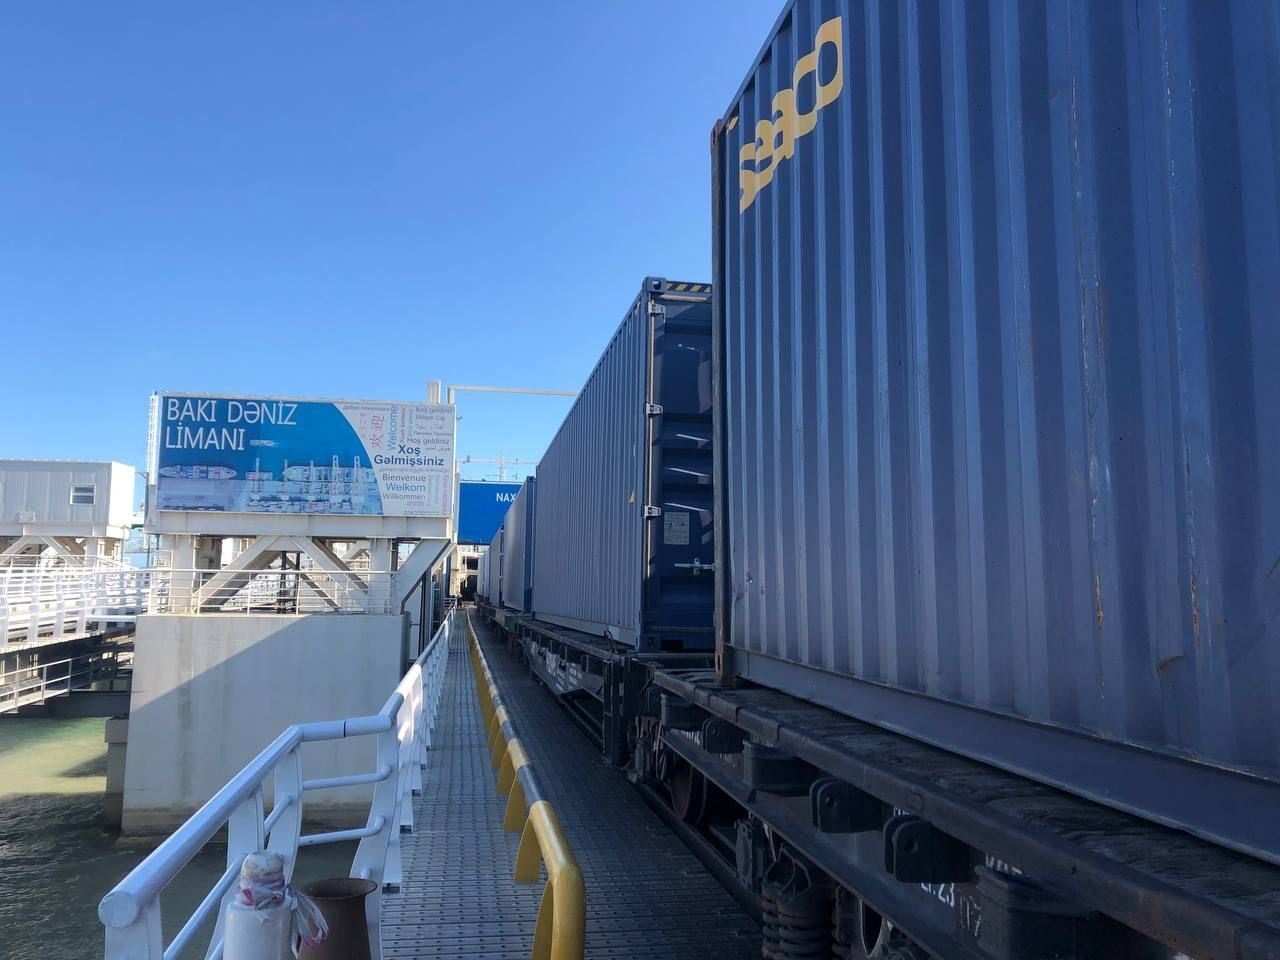 First batch of cargo from China to be transported through Port of Baku to Finland [PHOTO]